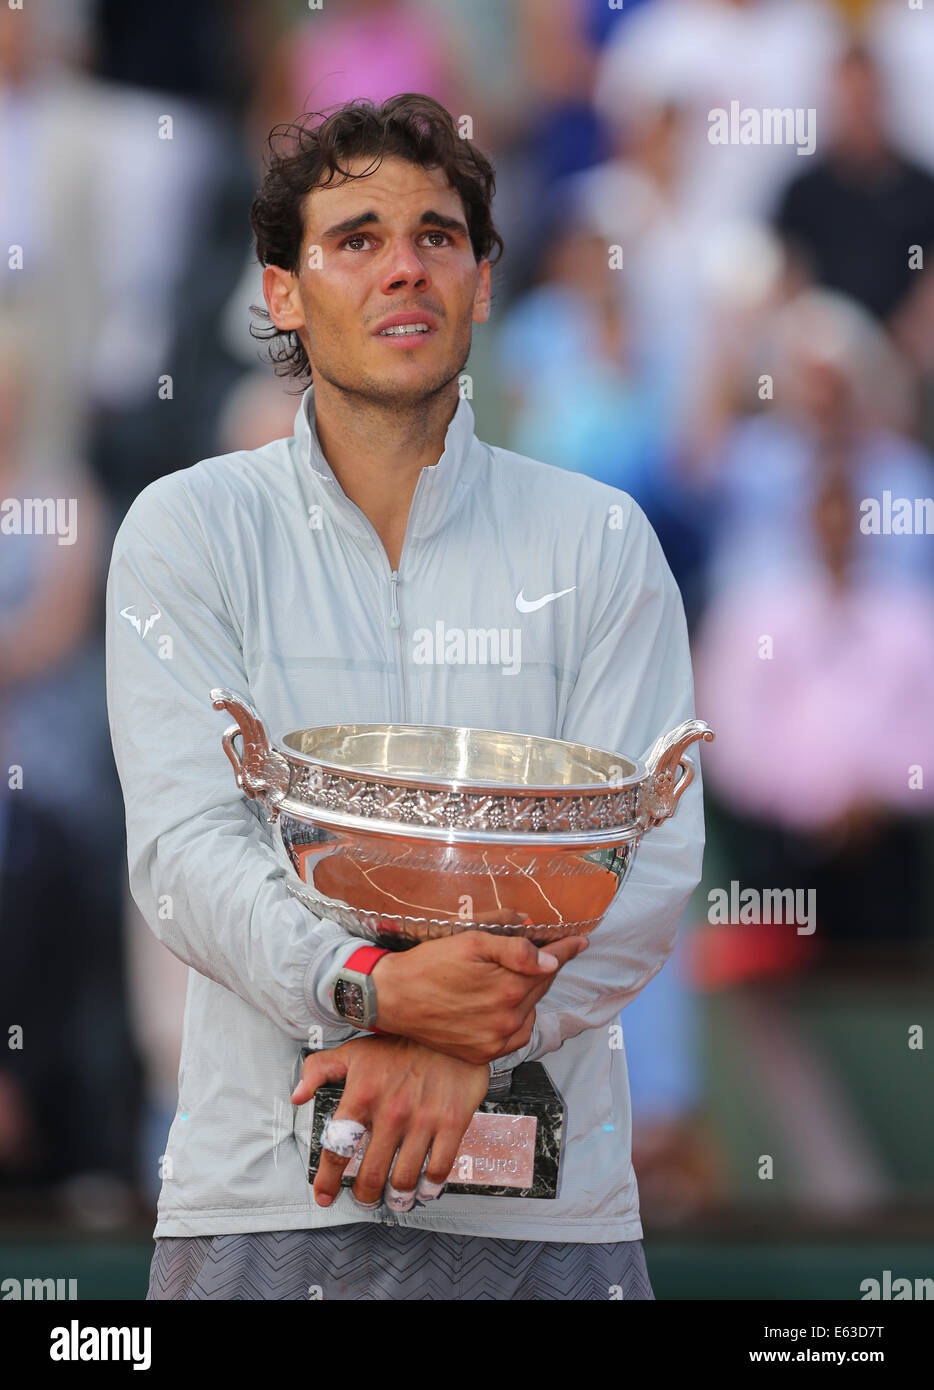 Rafael nadal spain holds trophy hi-res stock photography and images - Alamy